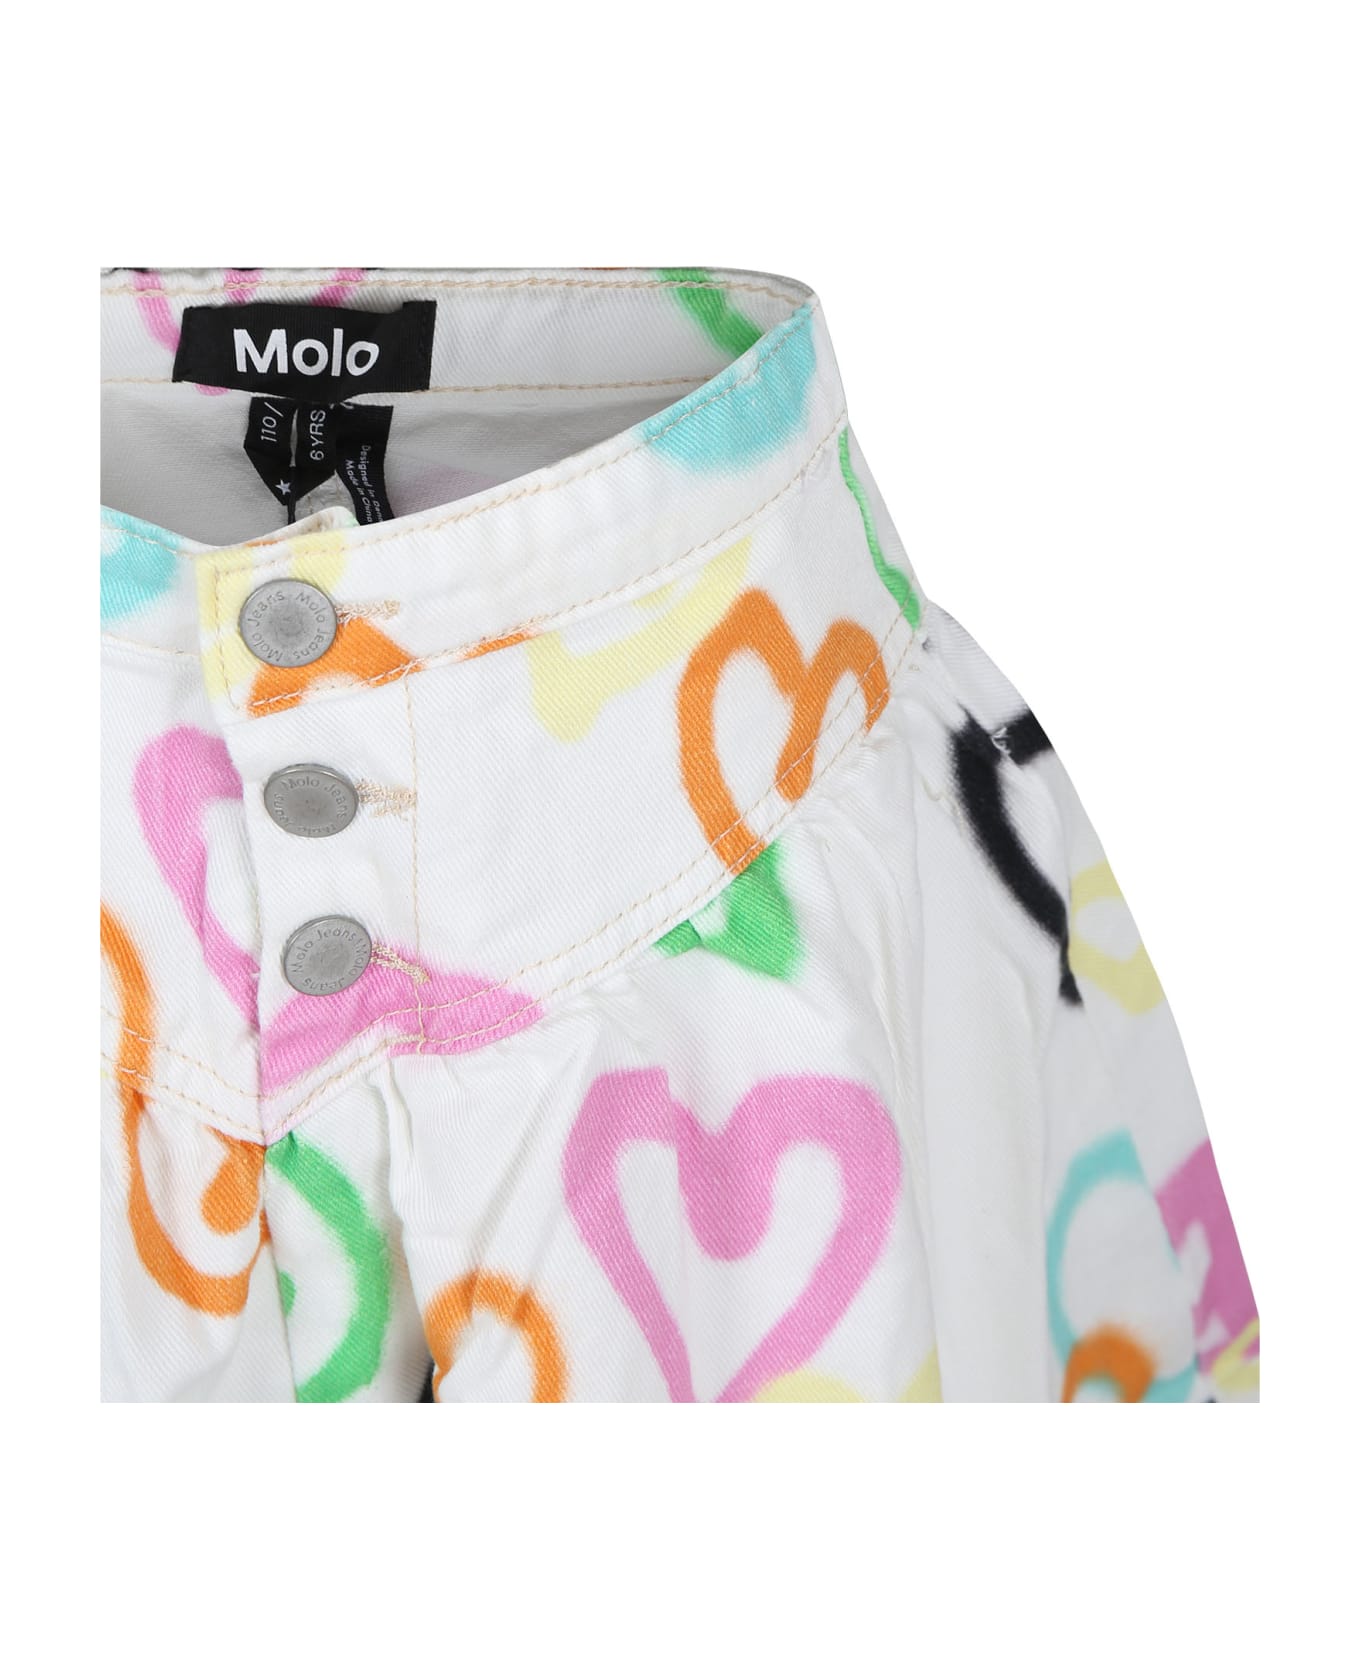 Molo White Skirt For Girl With Hearts Print - White